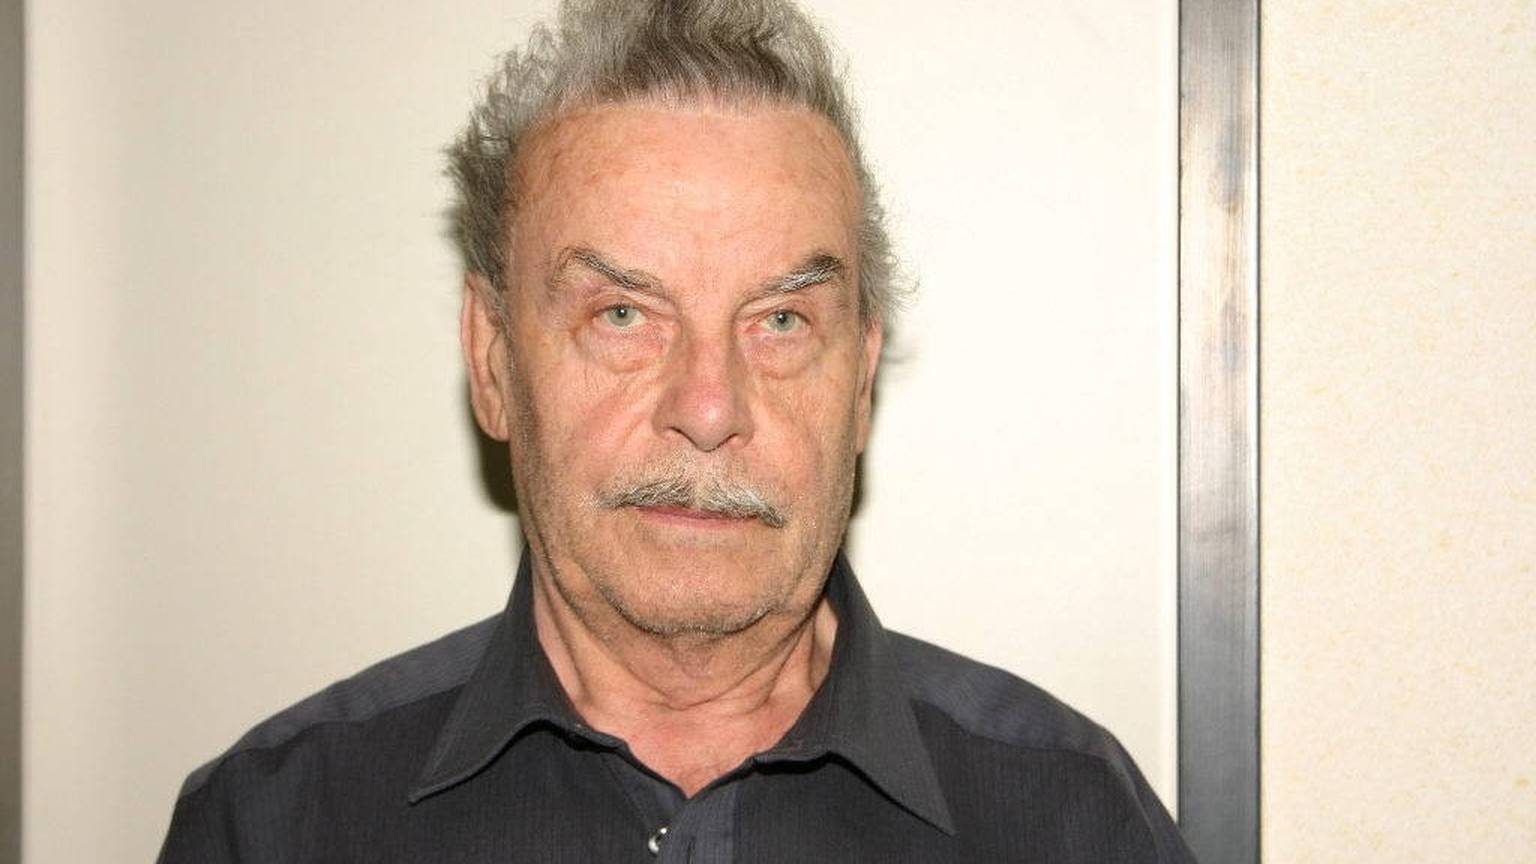 Austrian admits 24-year abuse of daughter Police handout photo 73-year-old Austrian Josef Fritzl, who has confessed to imprisoning his daughter Elisabeth into the basement of the family s home, in a w ...